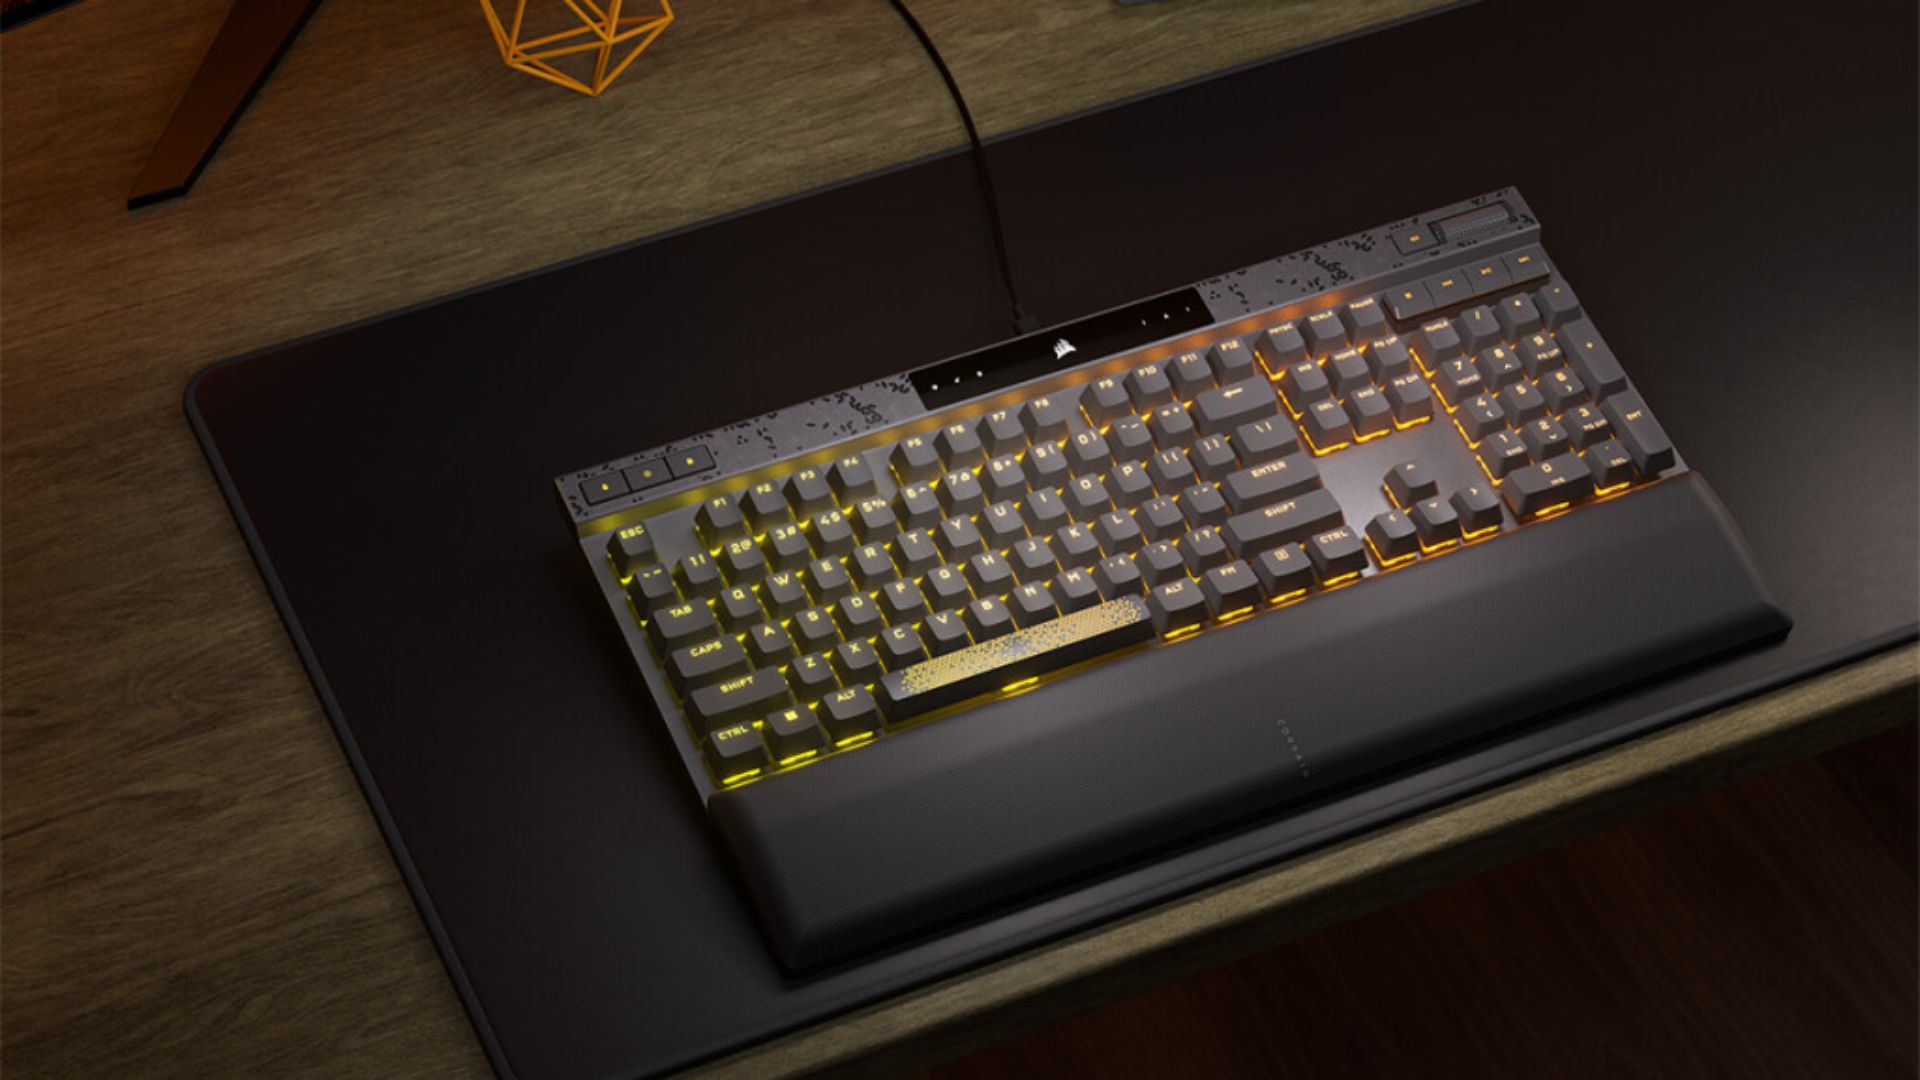 CORSAIR Launches K70 Max Keyboard With MGX Hall Effect Sensors - eTeknix